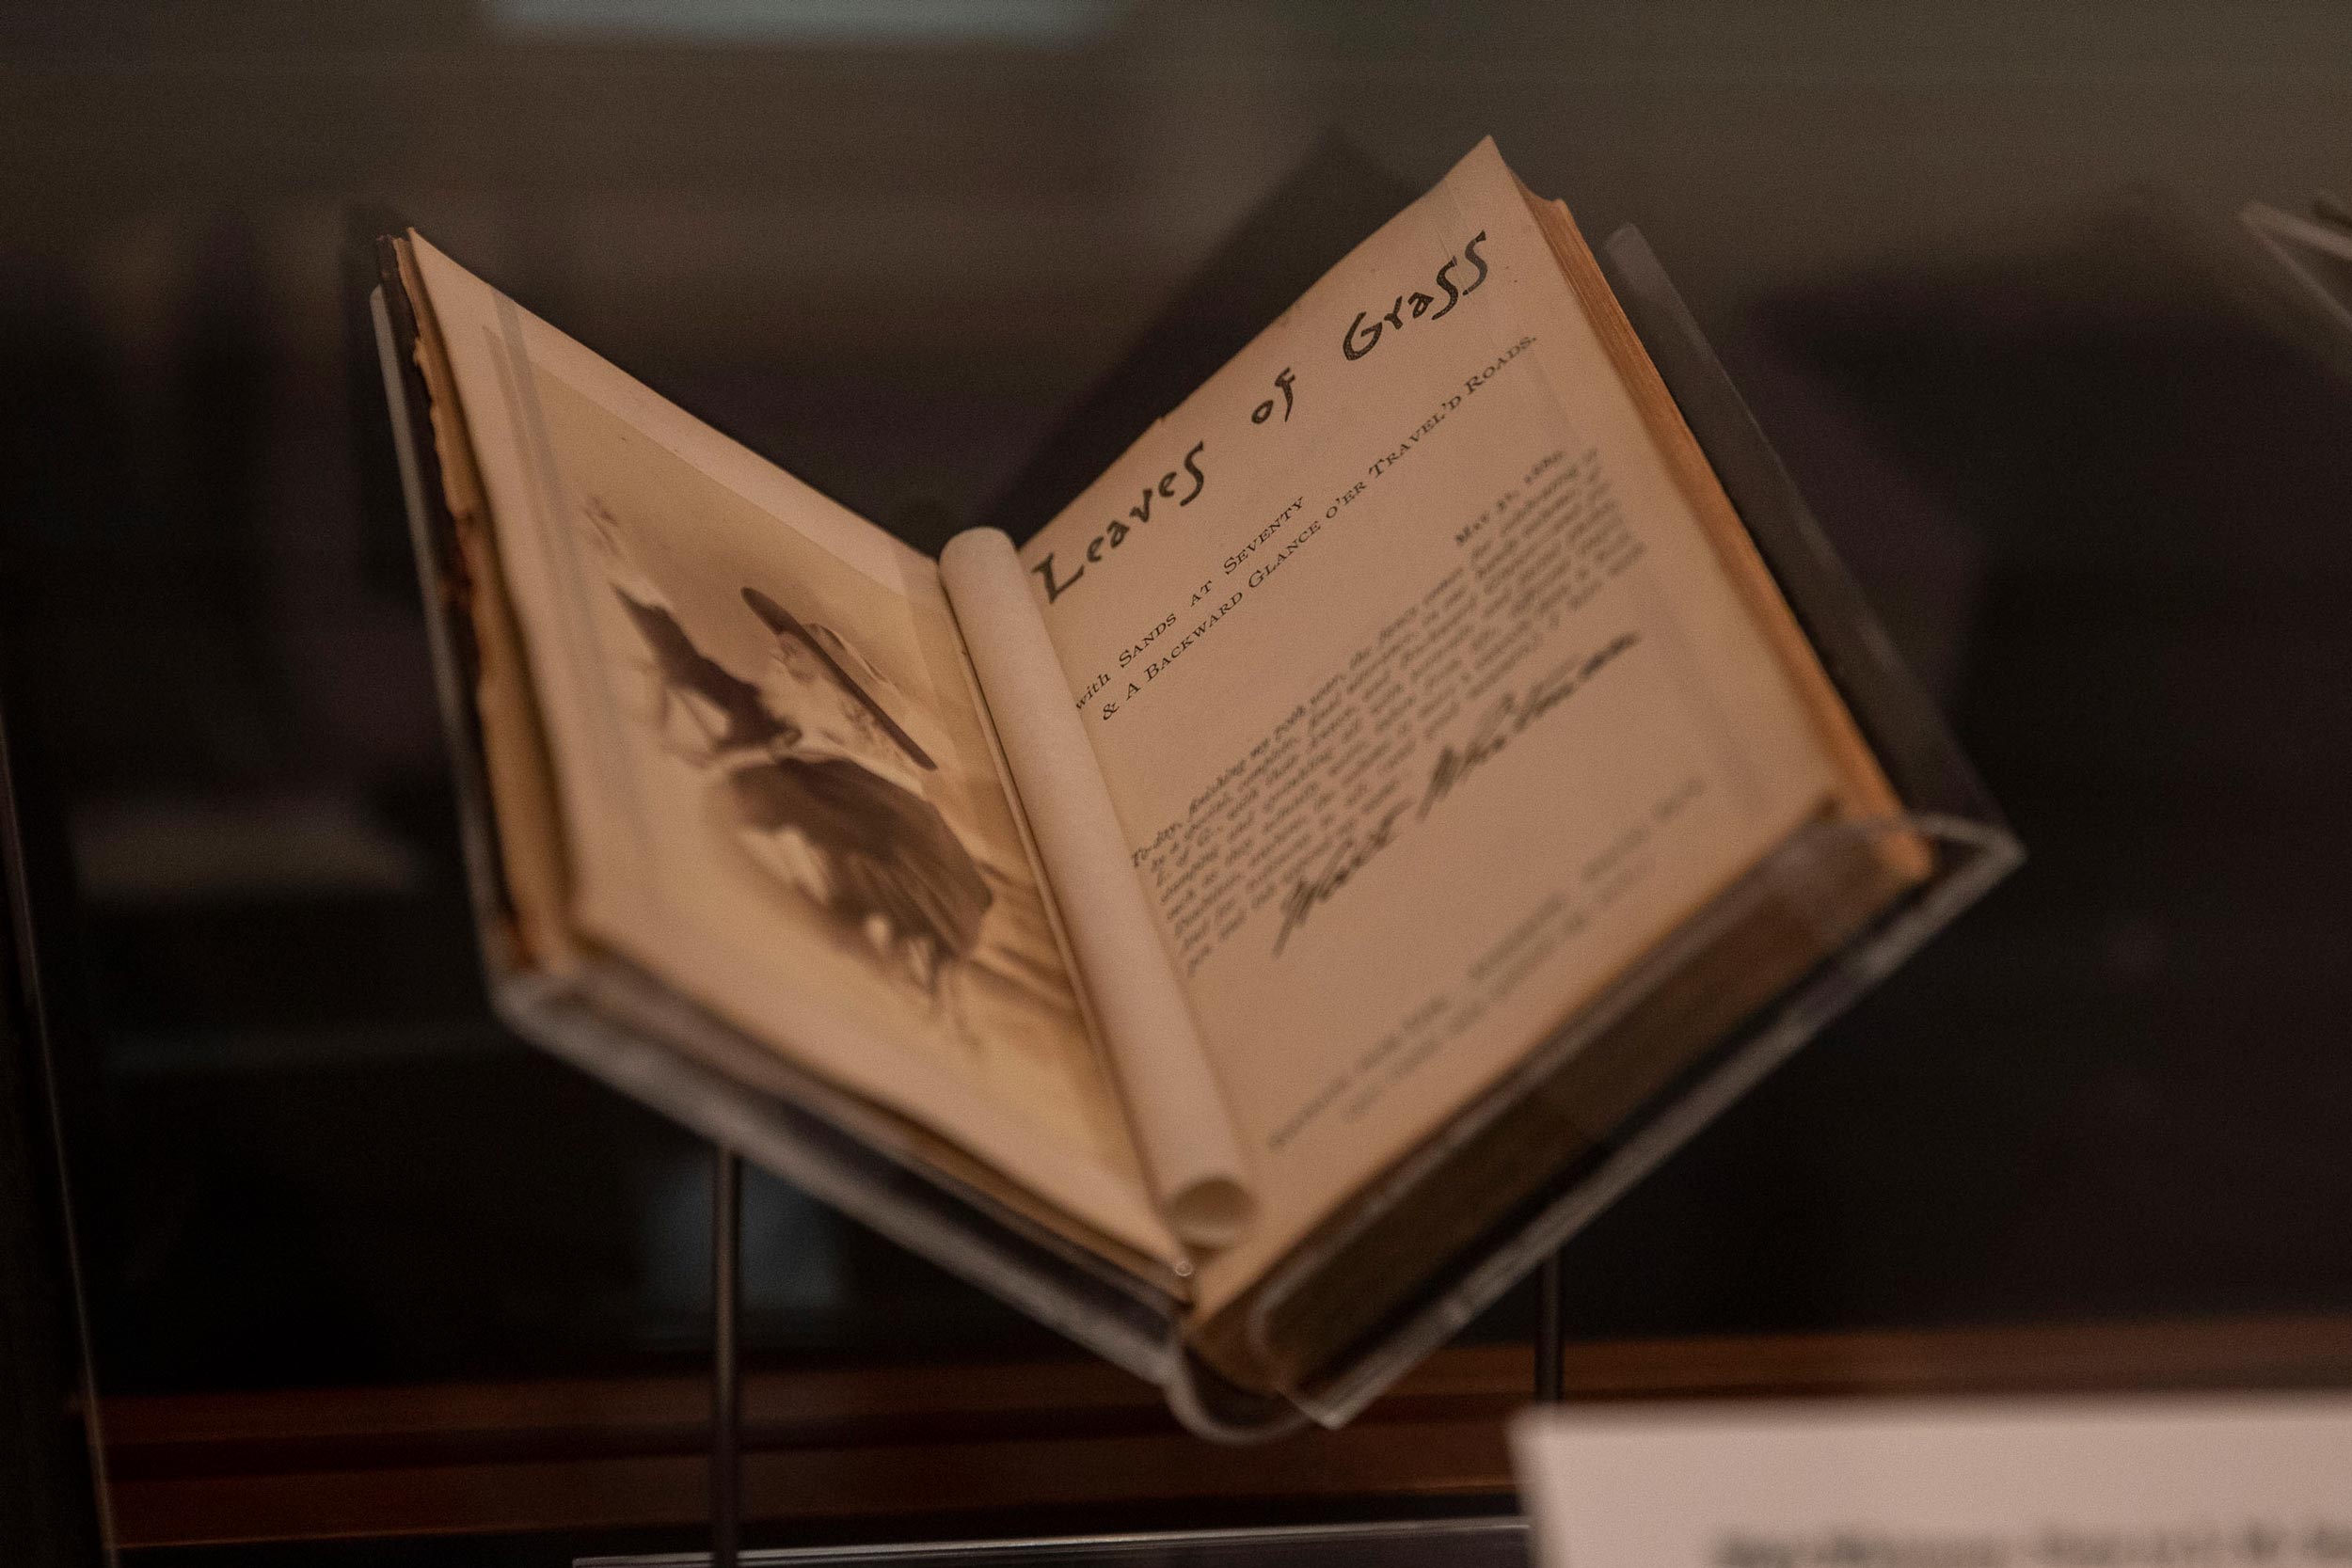 Leaves of Grass copy opened inside of a glass case